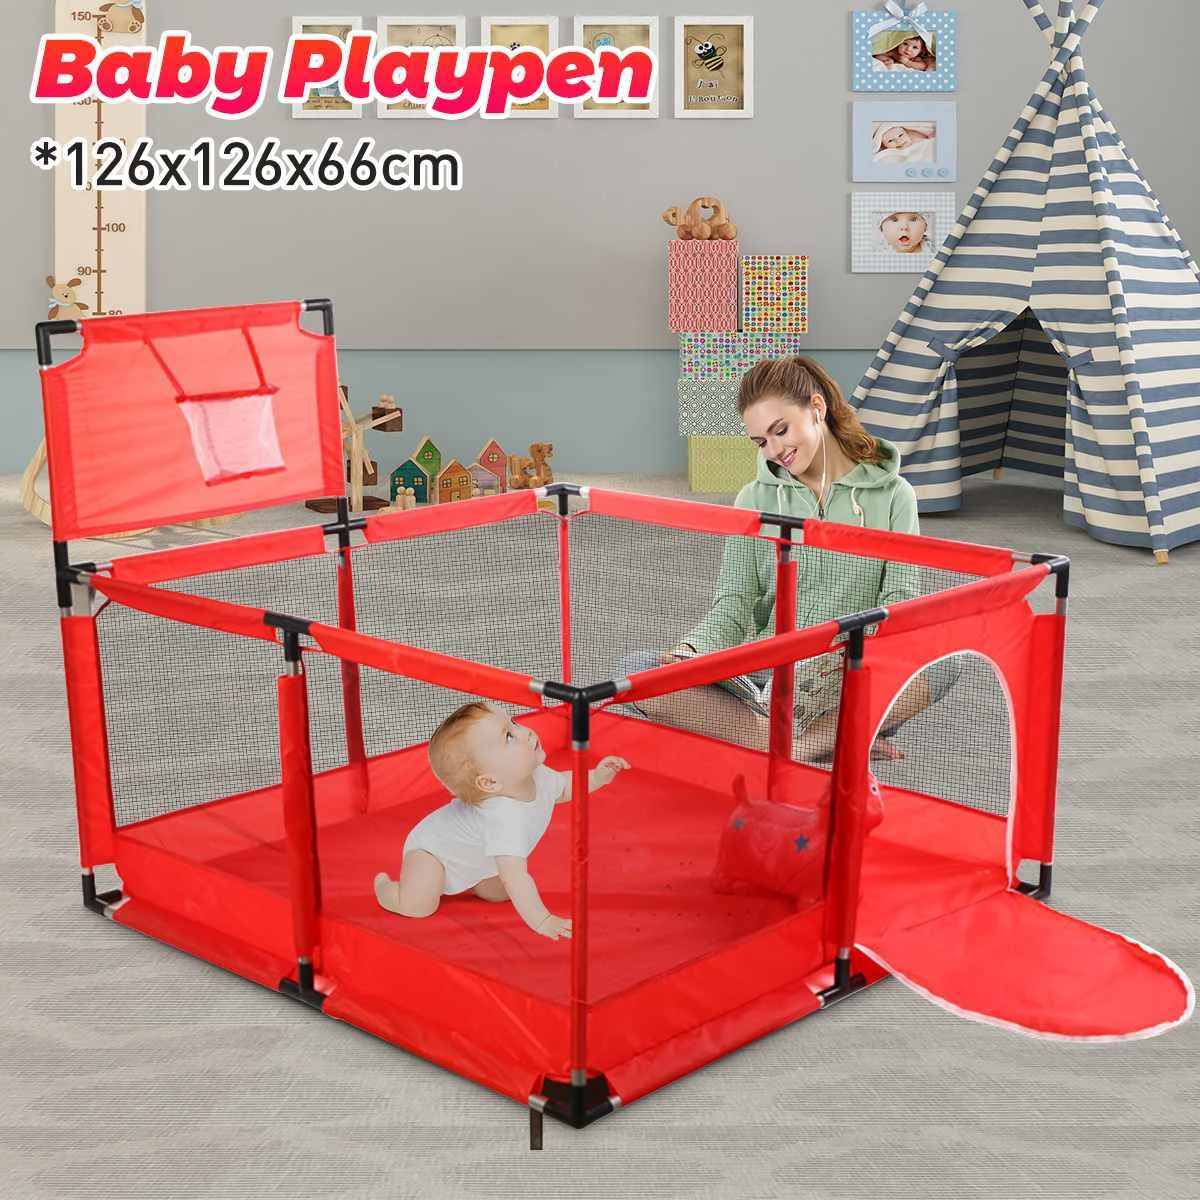 120cm Baby Playpen Children Furniture Playground Pool for 6 months~6 Years Old Kids Safety Indoor Barriers Home Basketball Park